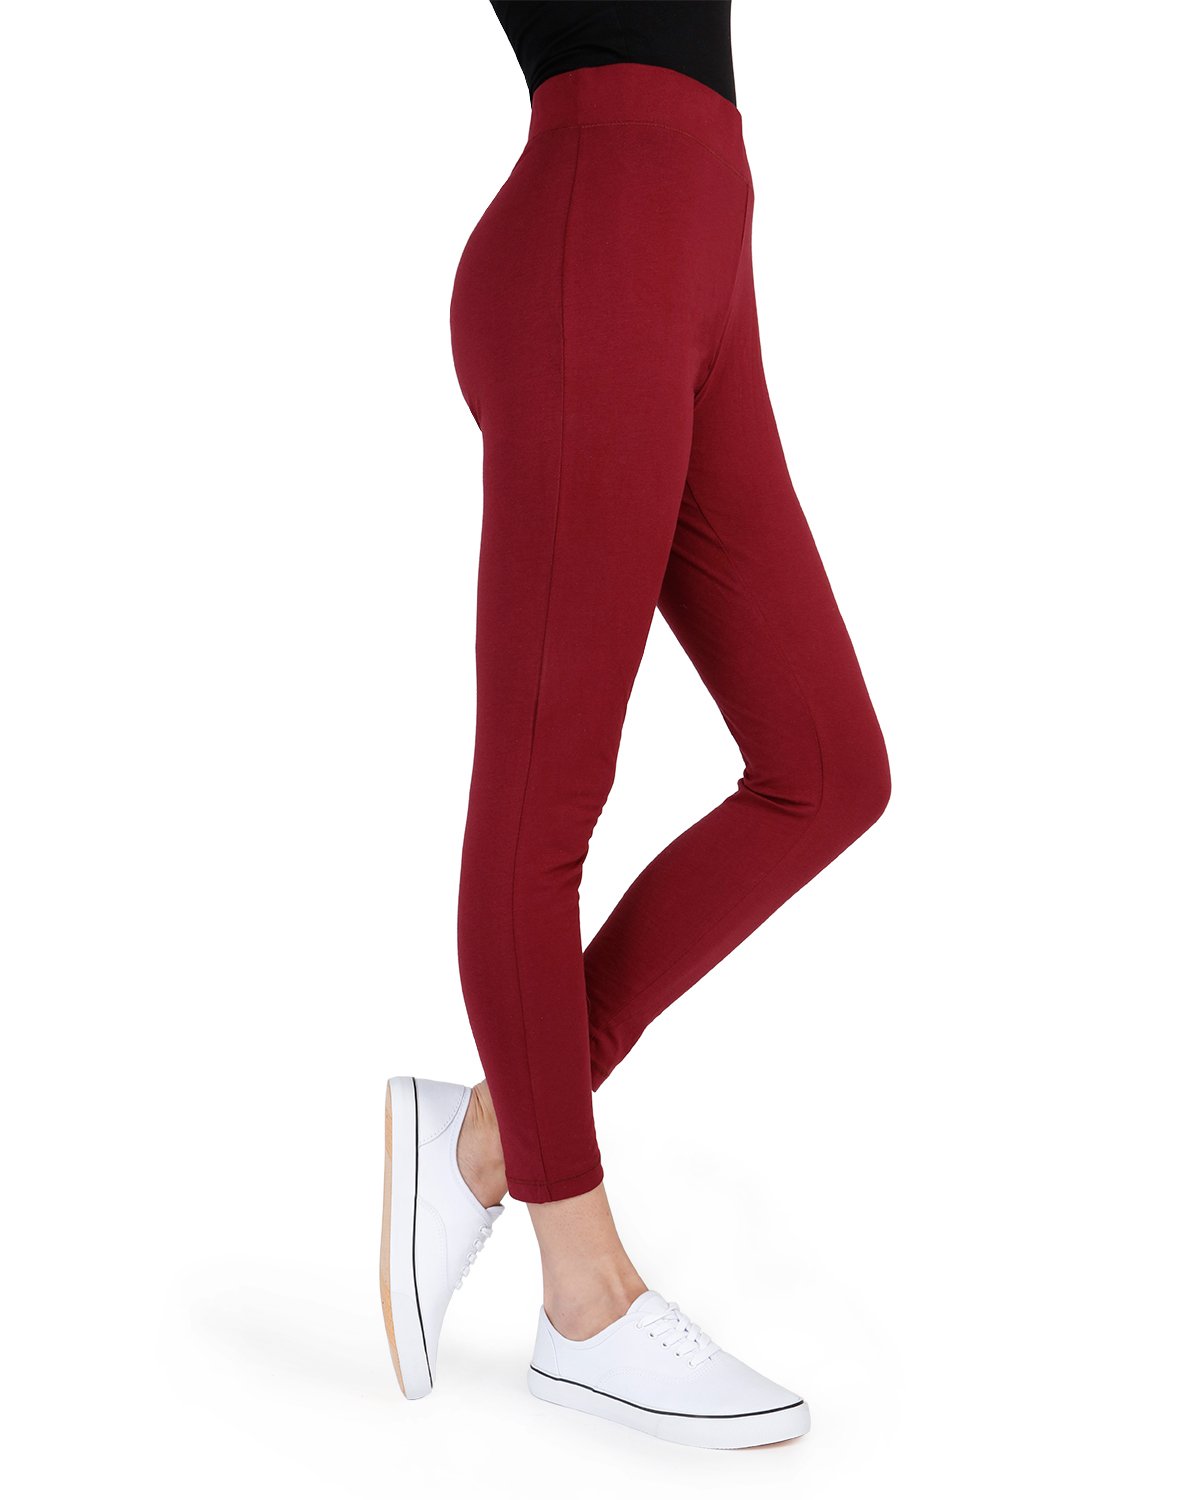 Cold Weather Run Tights